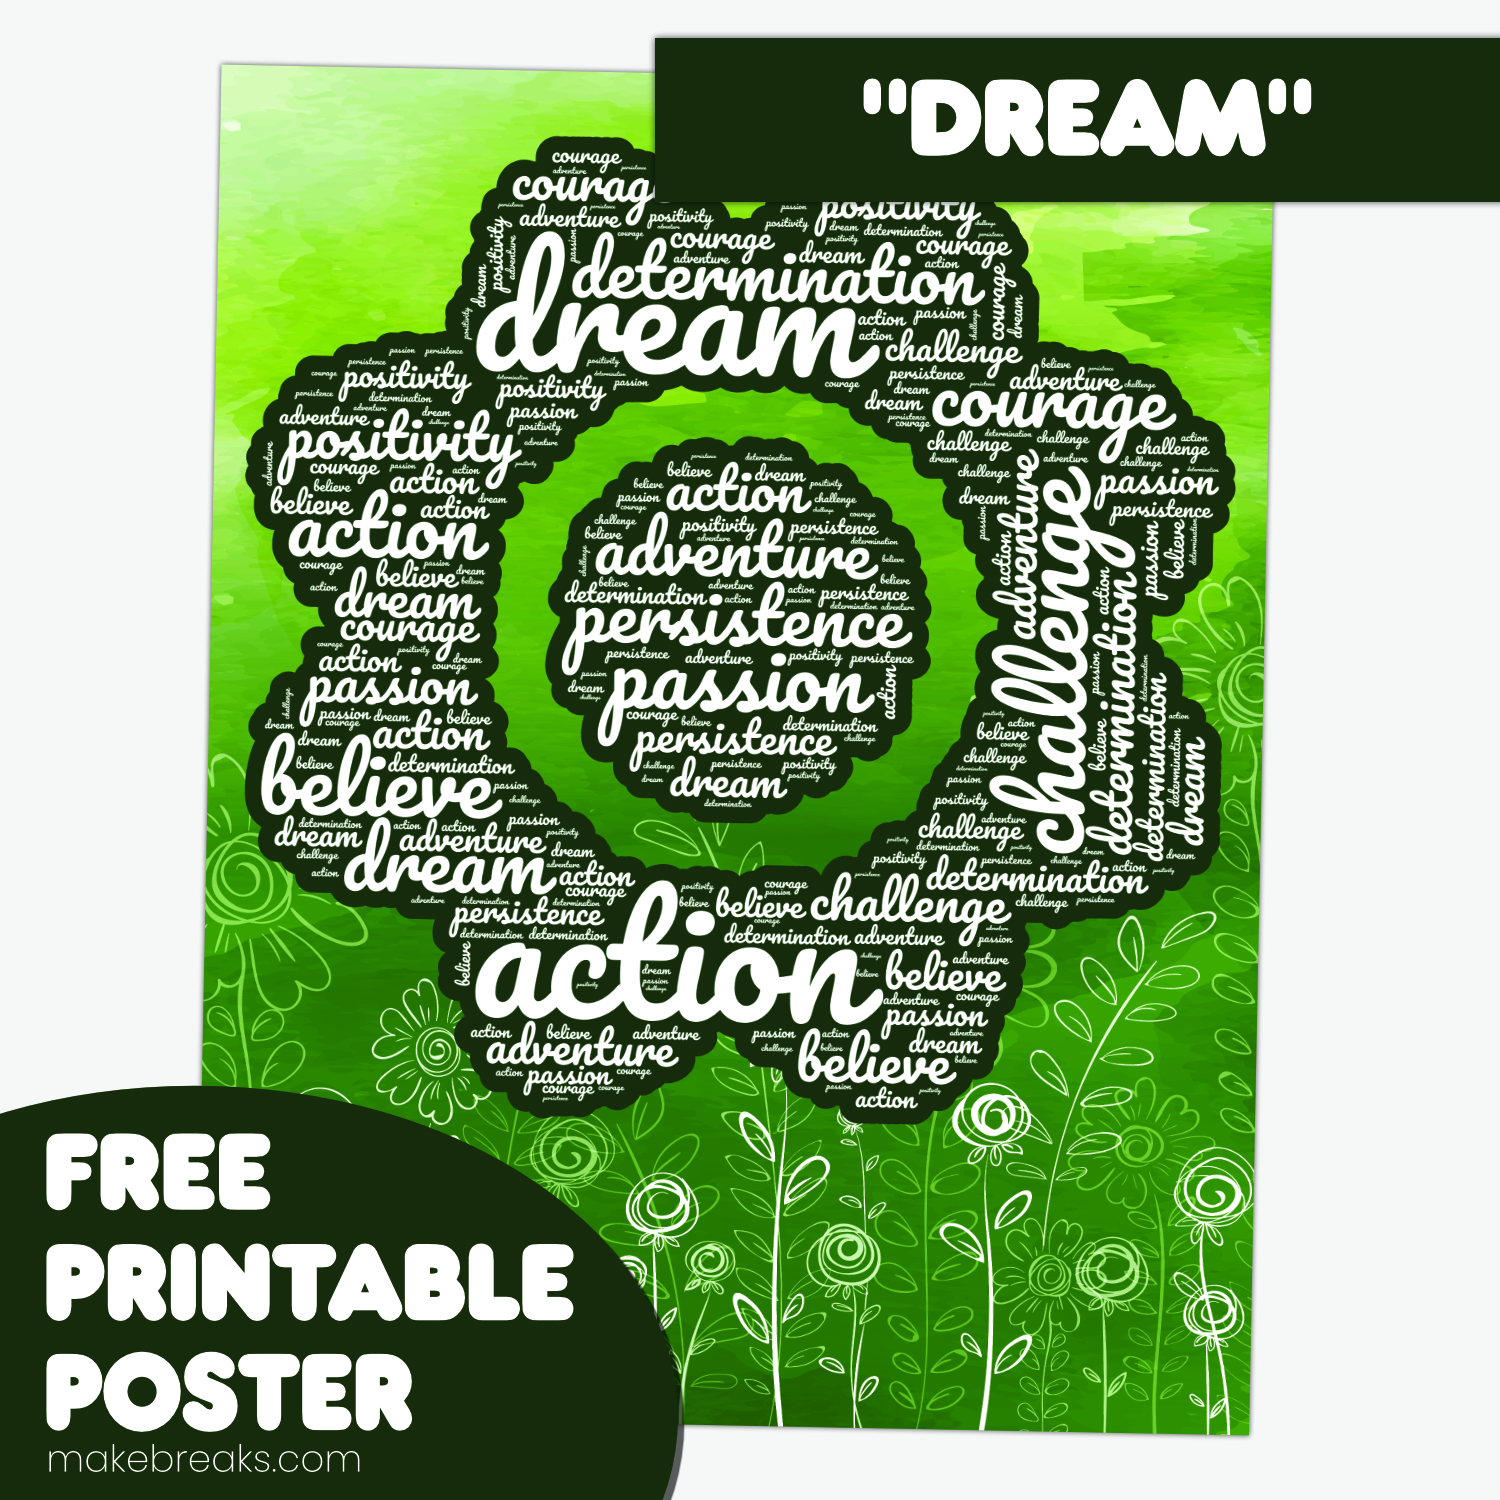 Free Printable ‘Dream’ Motivational Word Cloud Poster